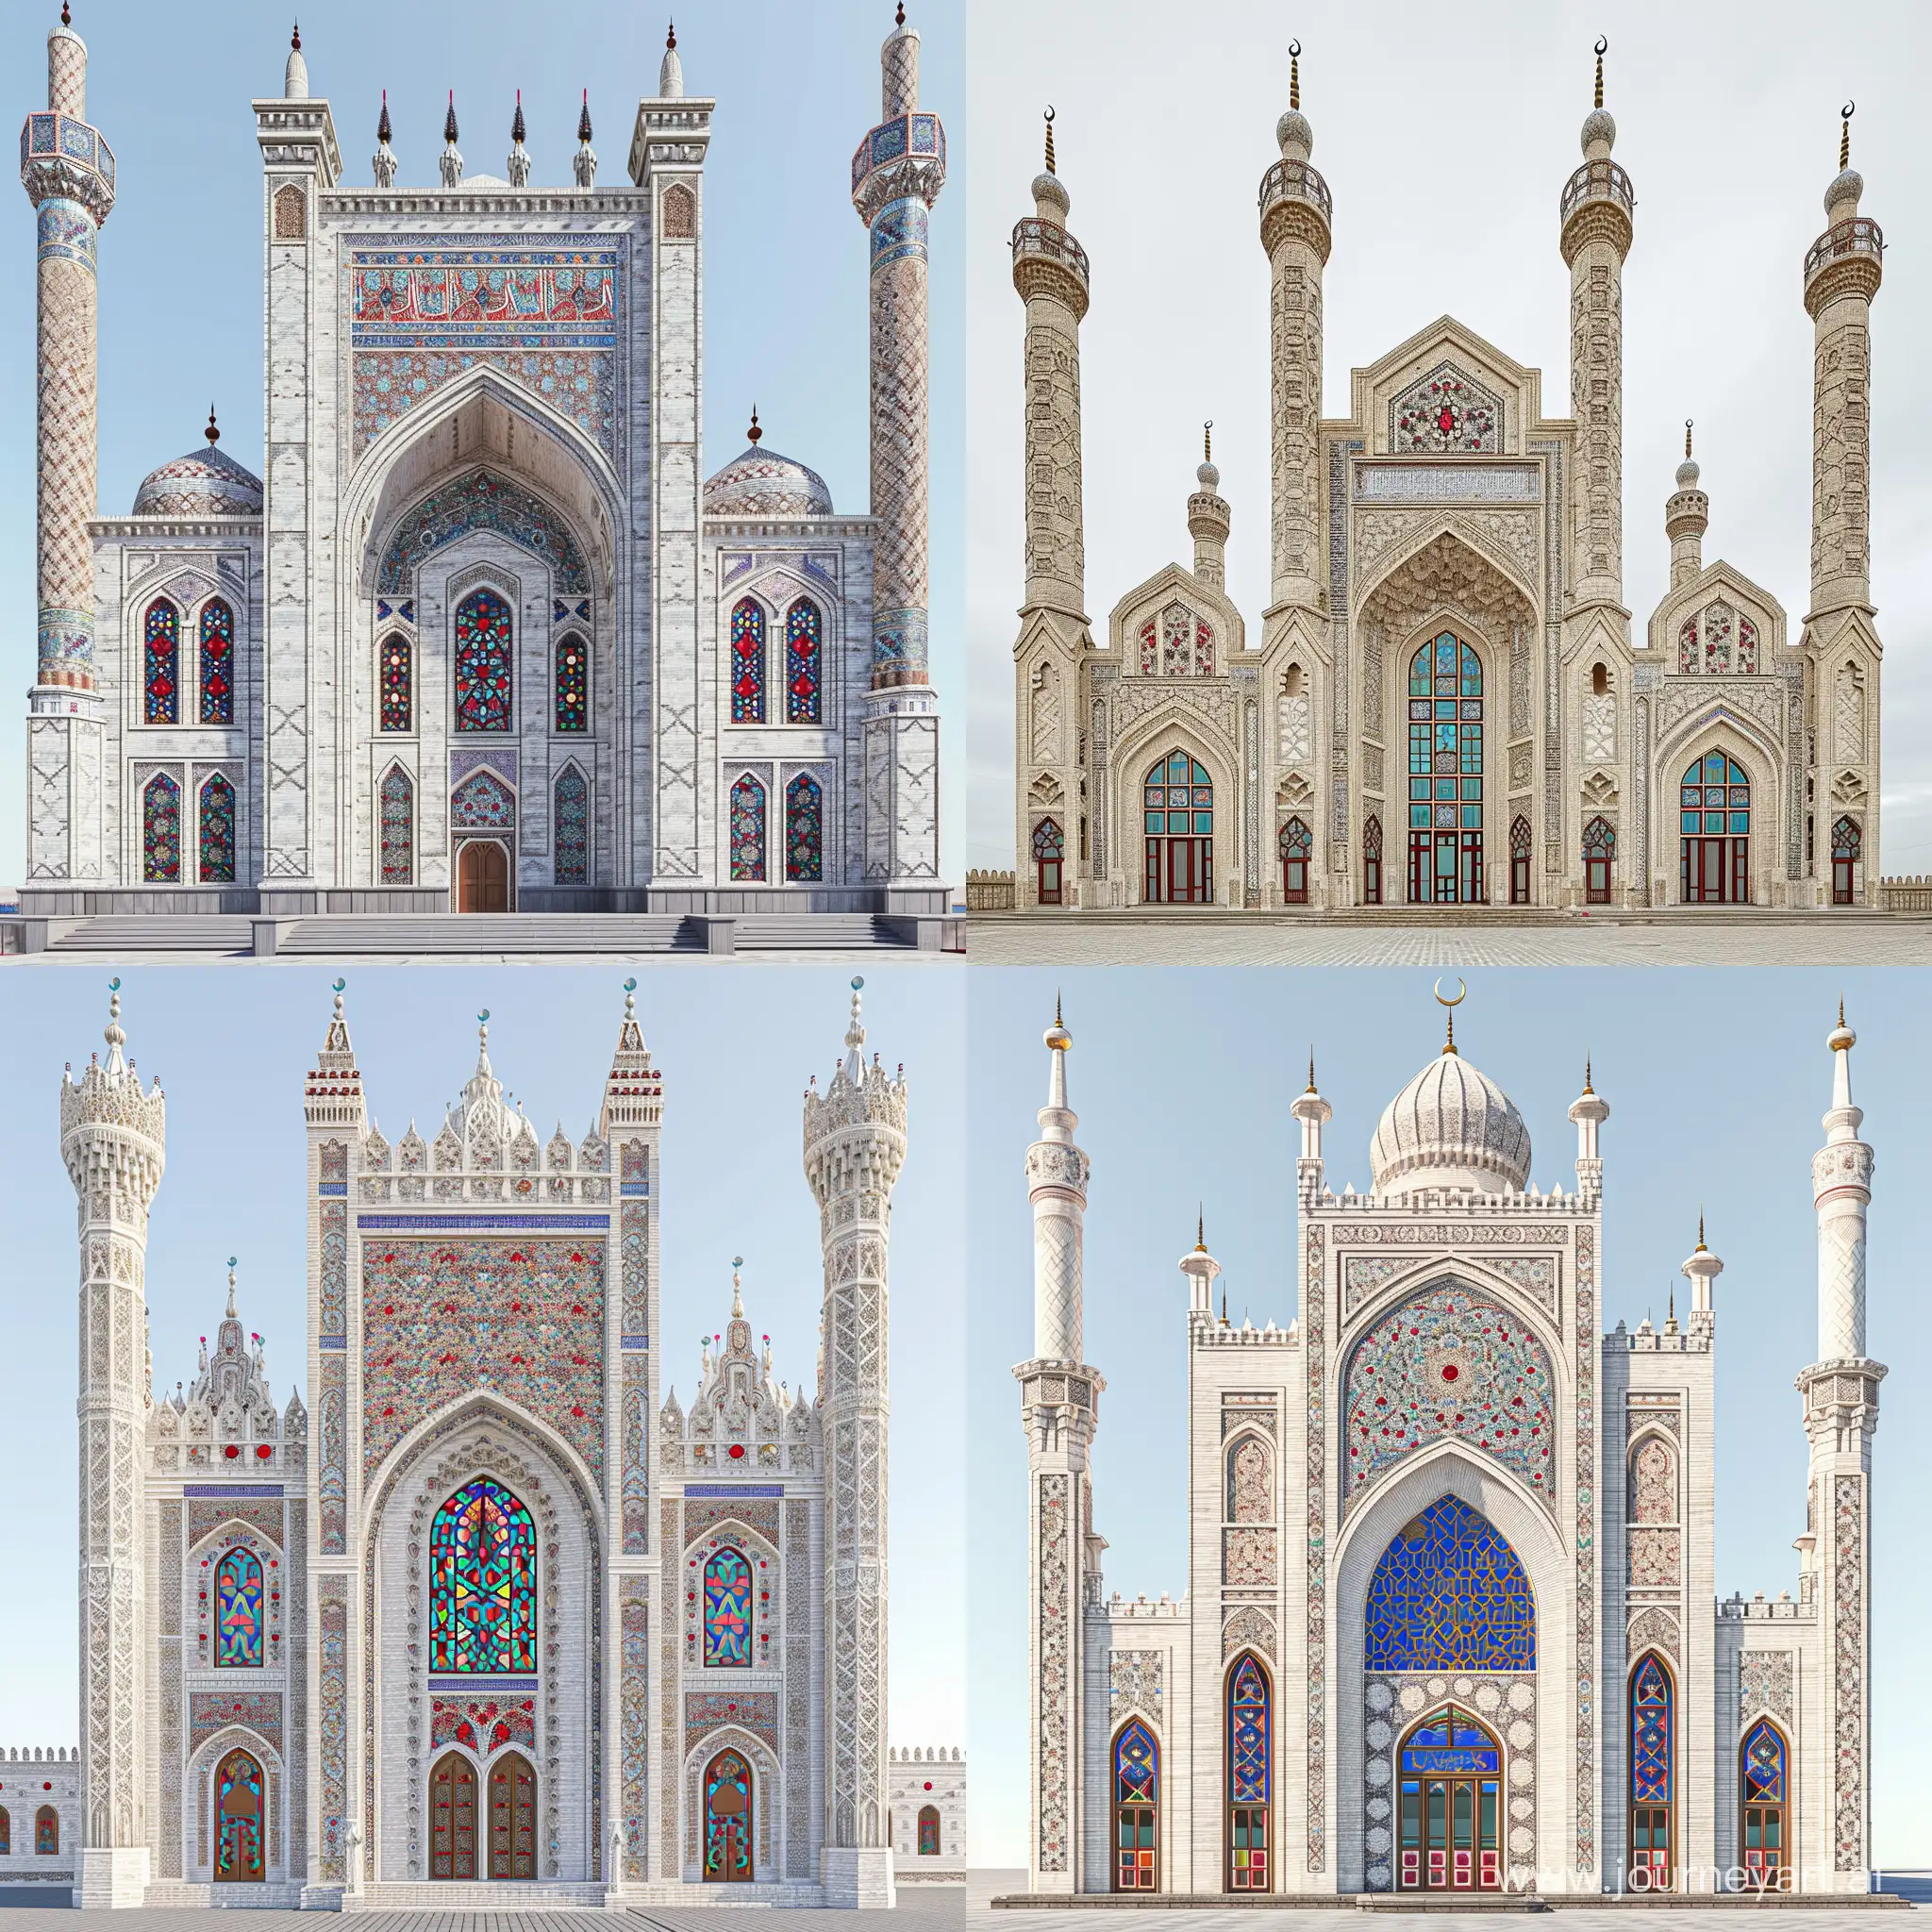 an Uzbekistan style multi level mosque, highly decorated with arabesque carvings, White marbled brick exterior, tall iwan with muqarnas, islamic stained glass windows, red blue persian floral design on spandrels, red blue gems and rubies embedded on islamic arabesque openwork ornaments, thin decorative minarets, many long decorative finials, full view, front view